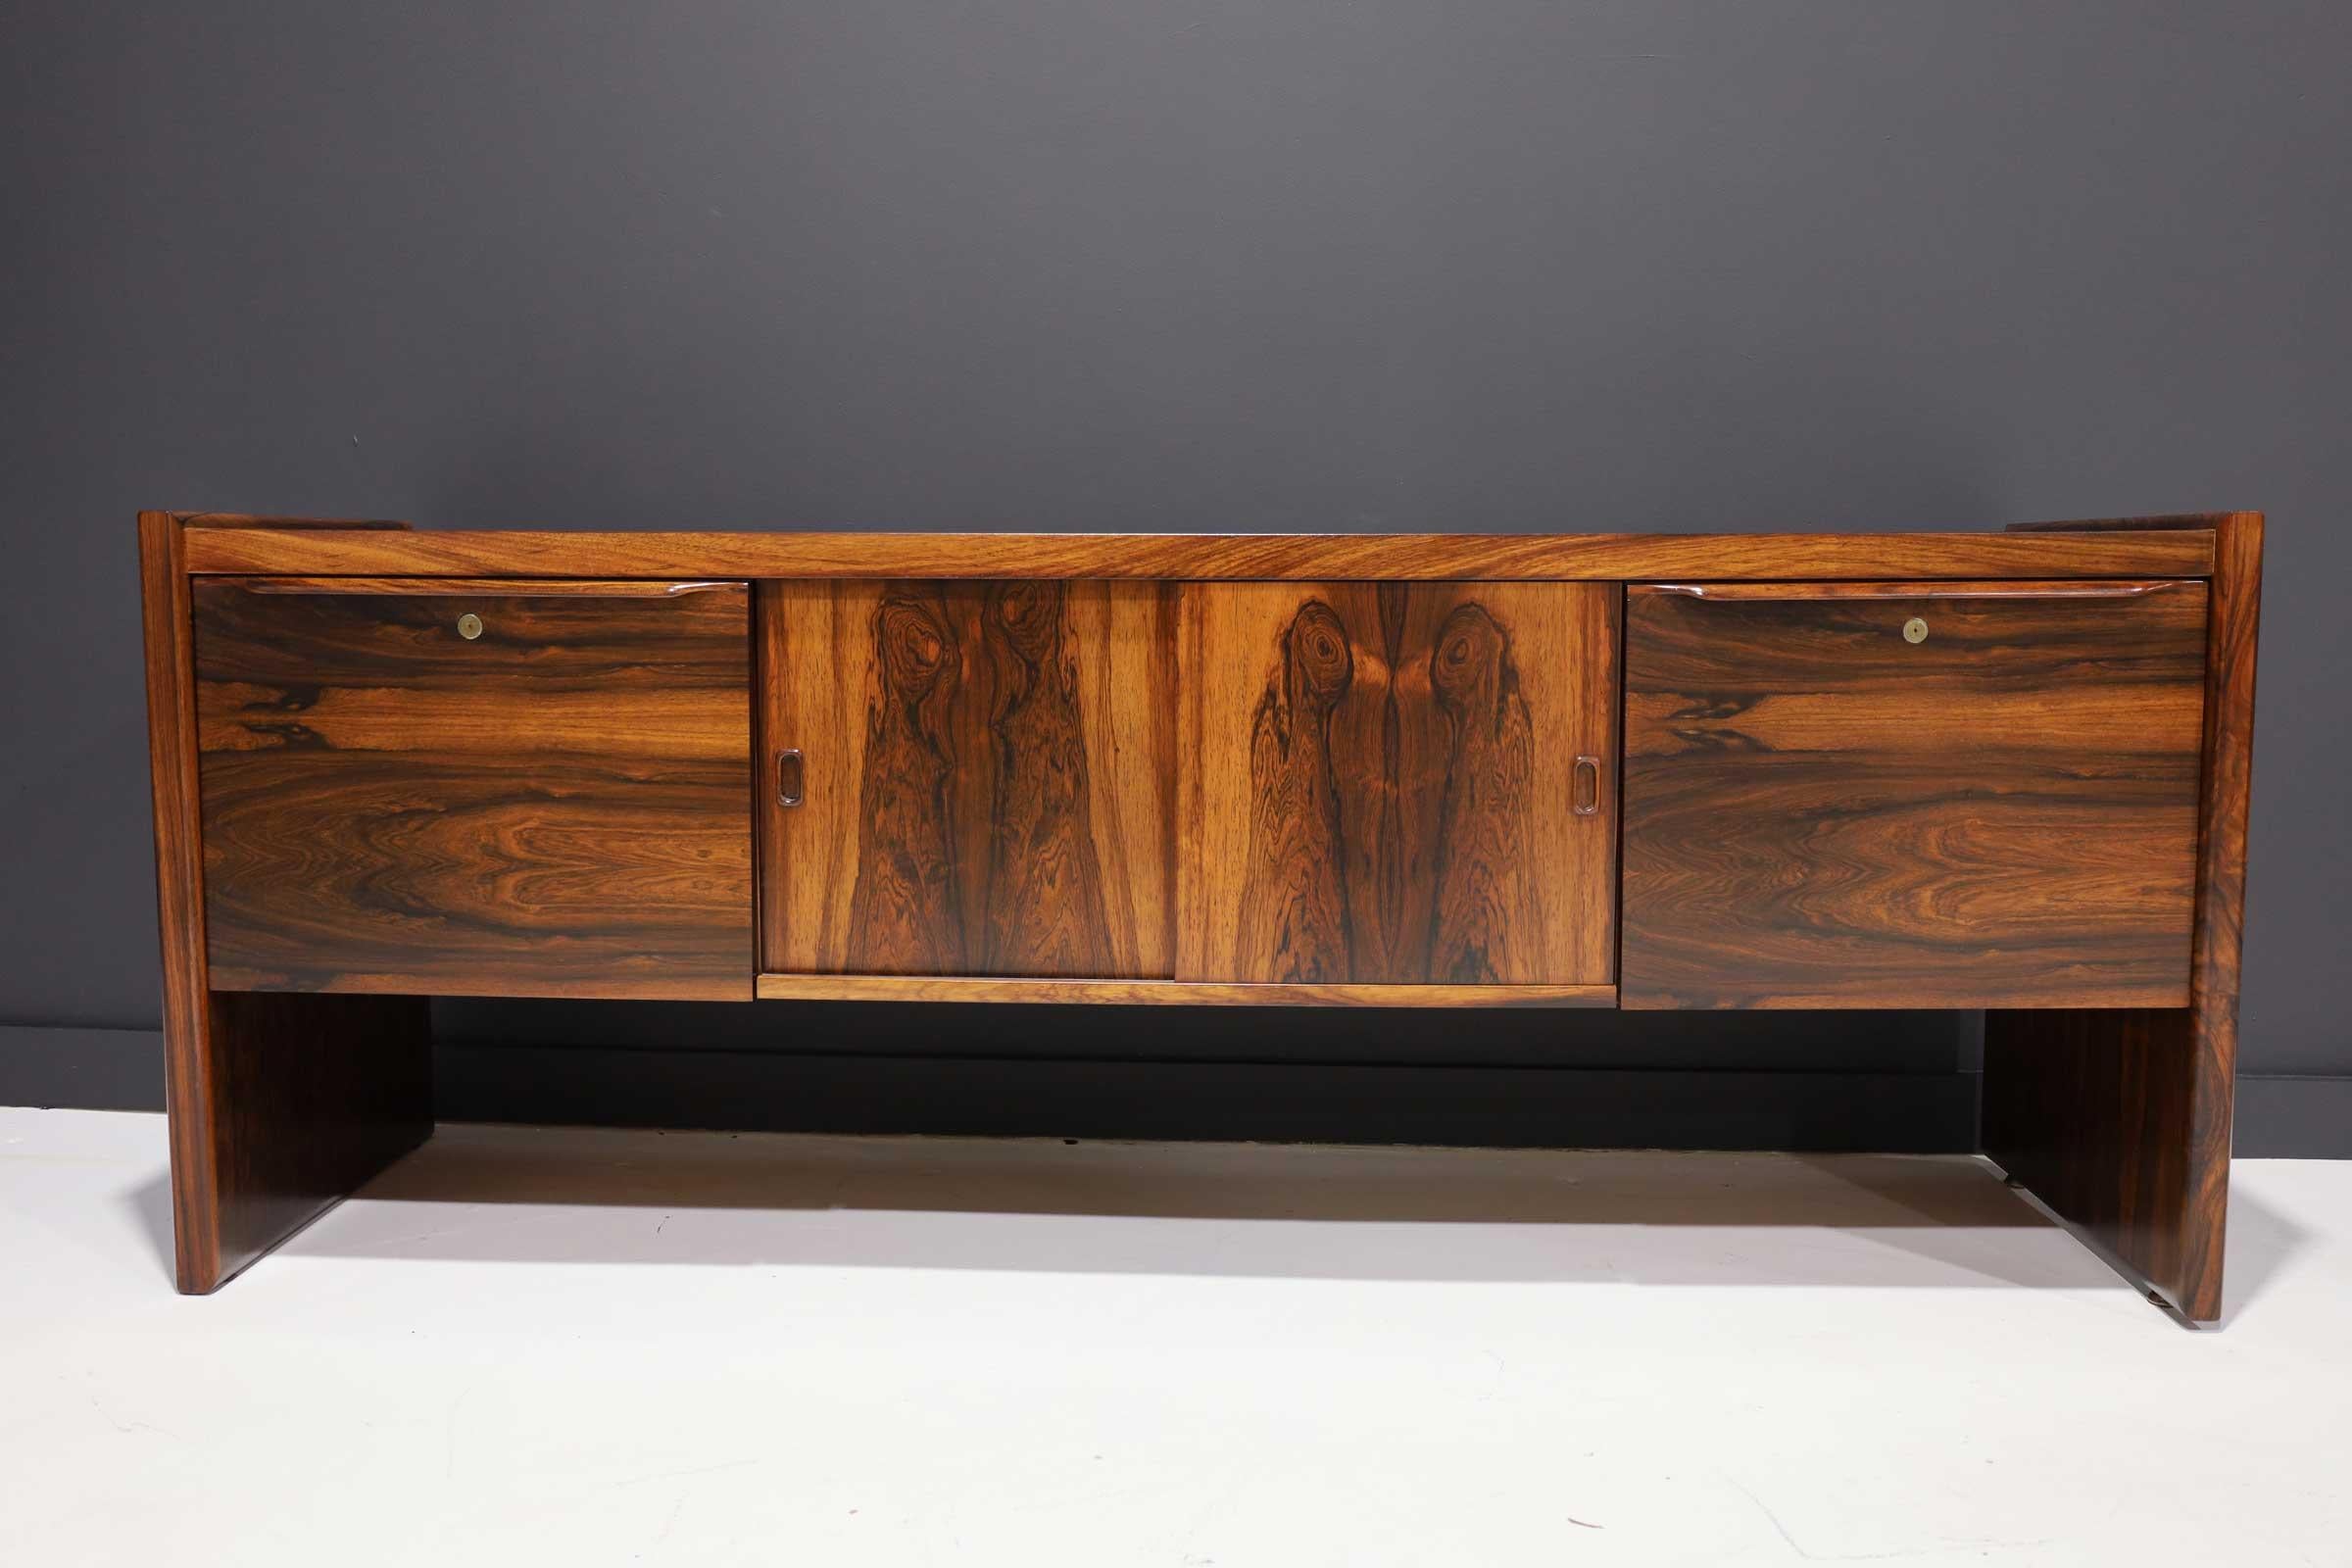 Gorgeous credenza with highly figured Brazilian rosewood veneer. Credenza features two drawers with room for legal or letter files and two sliding door with storage compartments. Credenza is finished in back for floating in room if needed.